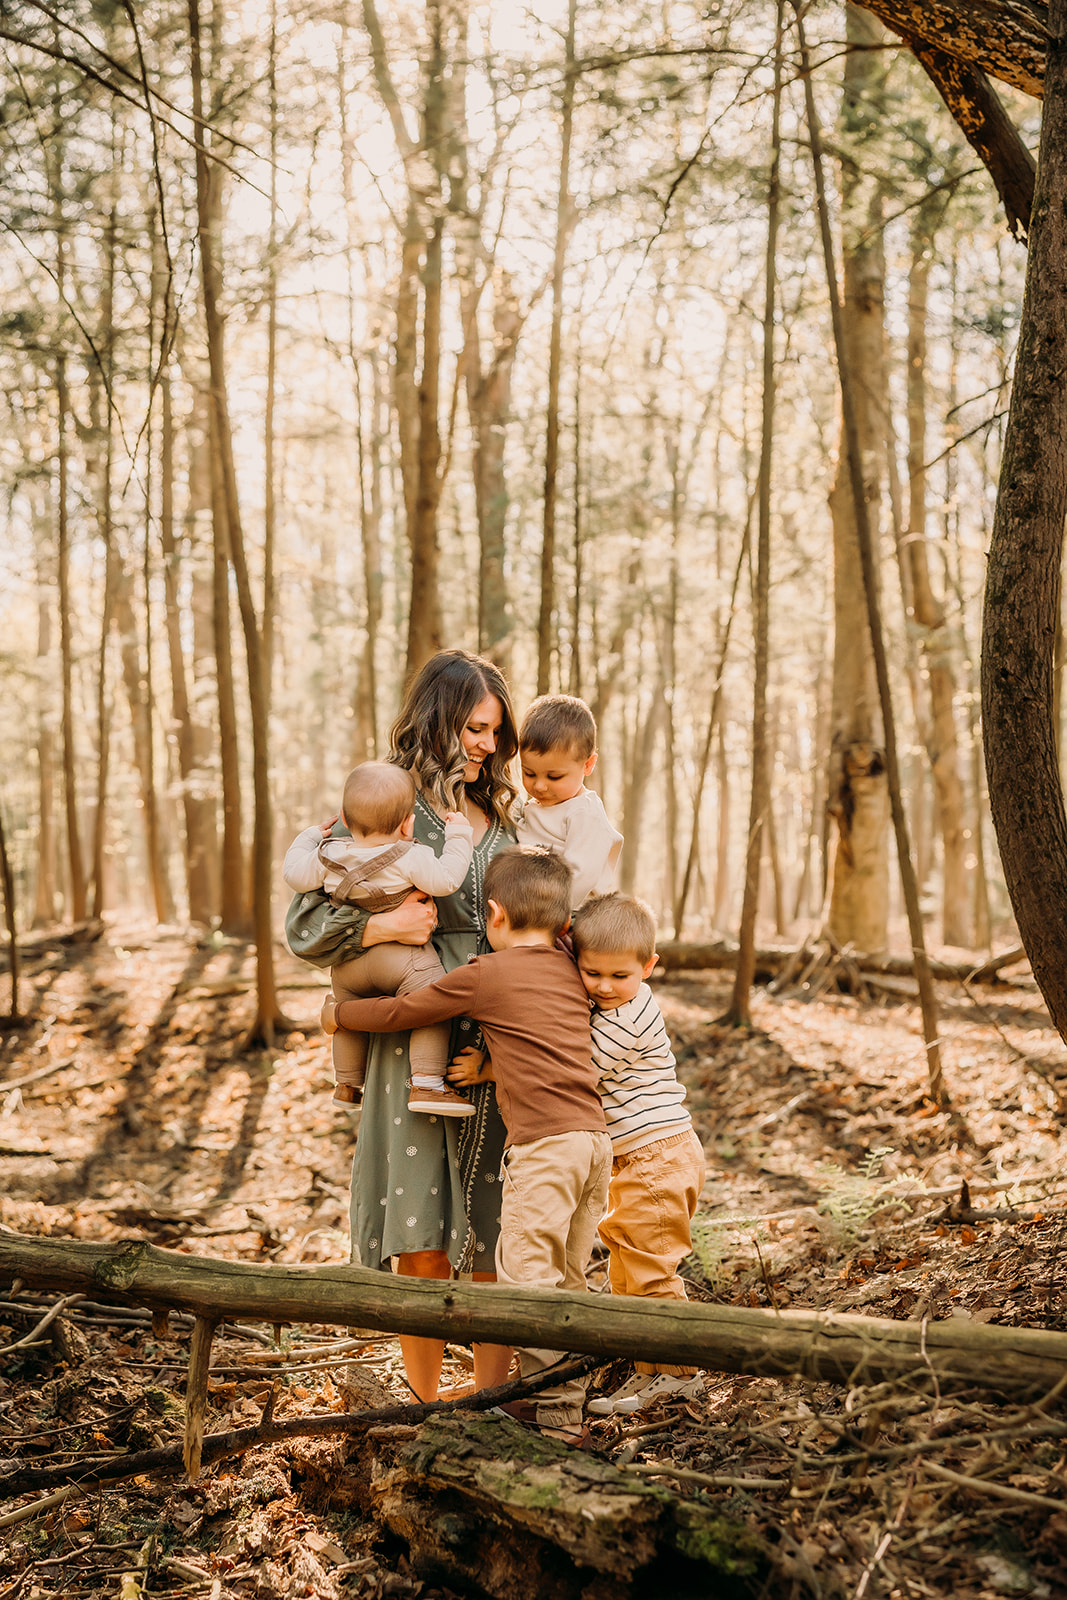 Beautiful mother and children framed by the enchanting forest scenery